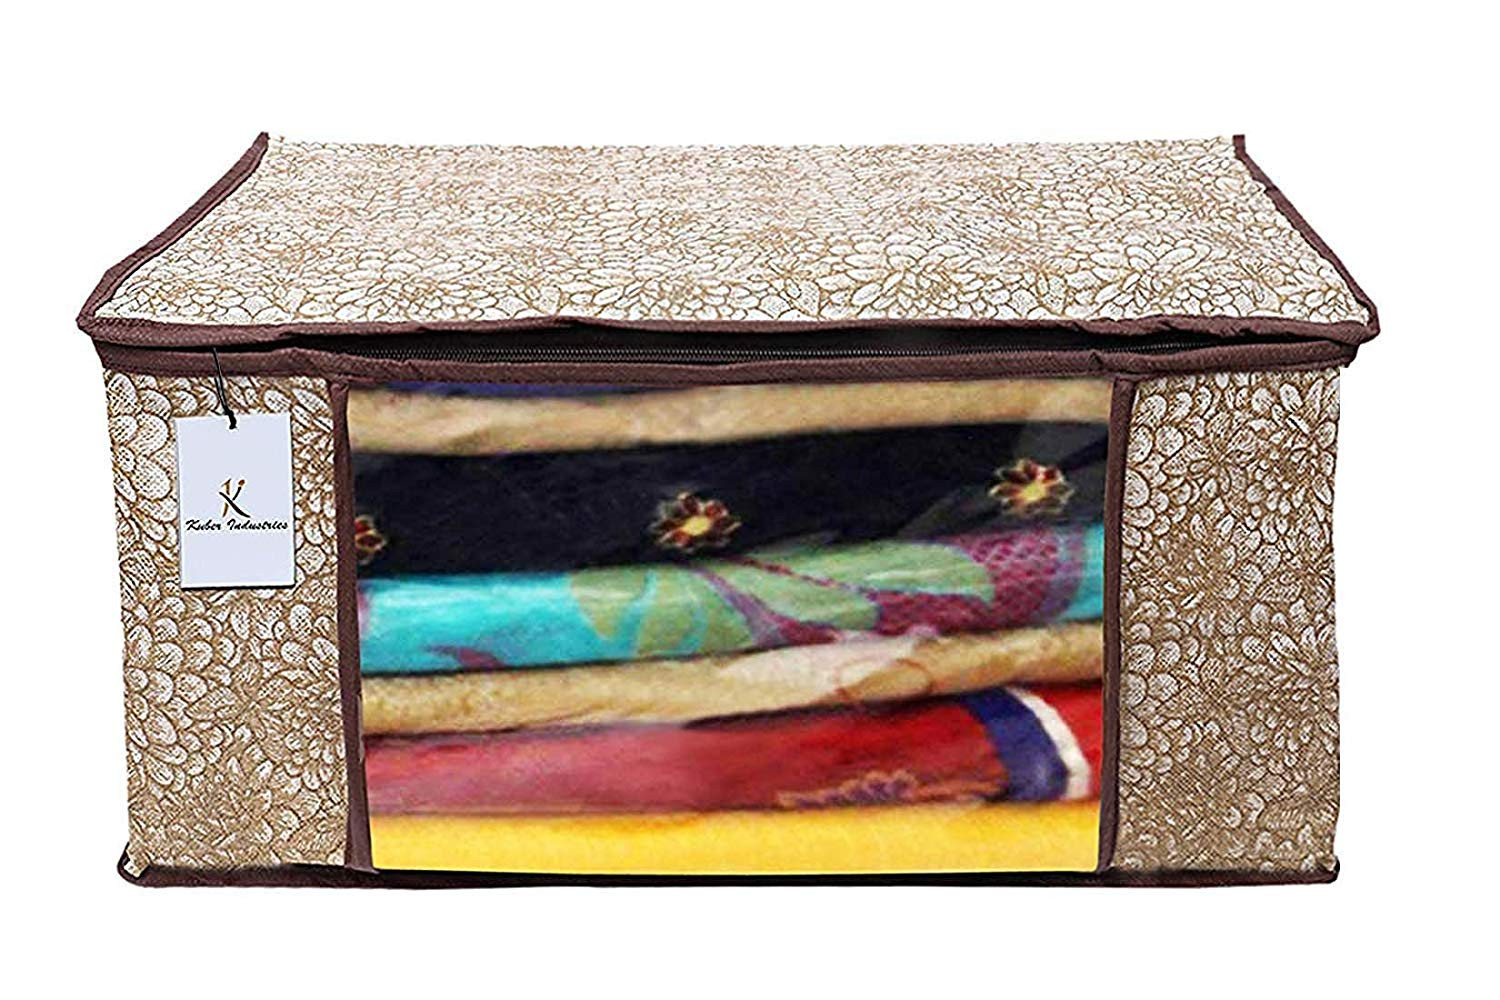 Kuber Industries Metallic Printed Non Woven Saree Cover And Underbed Storage Bag, Cloth Organizer For Storage, Blanket Cover Combo Set (Gold & Brown) -CTKTC38595